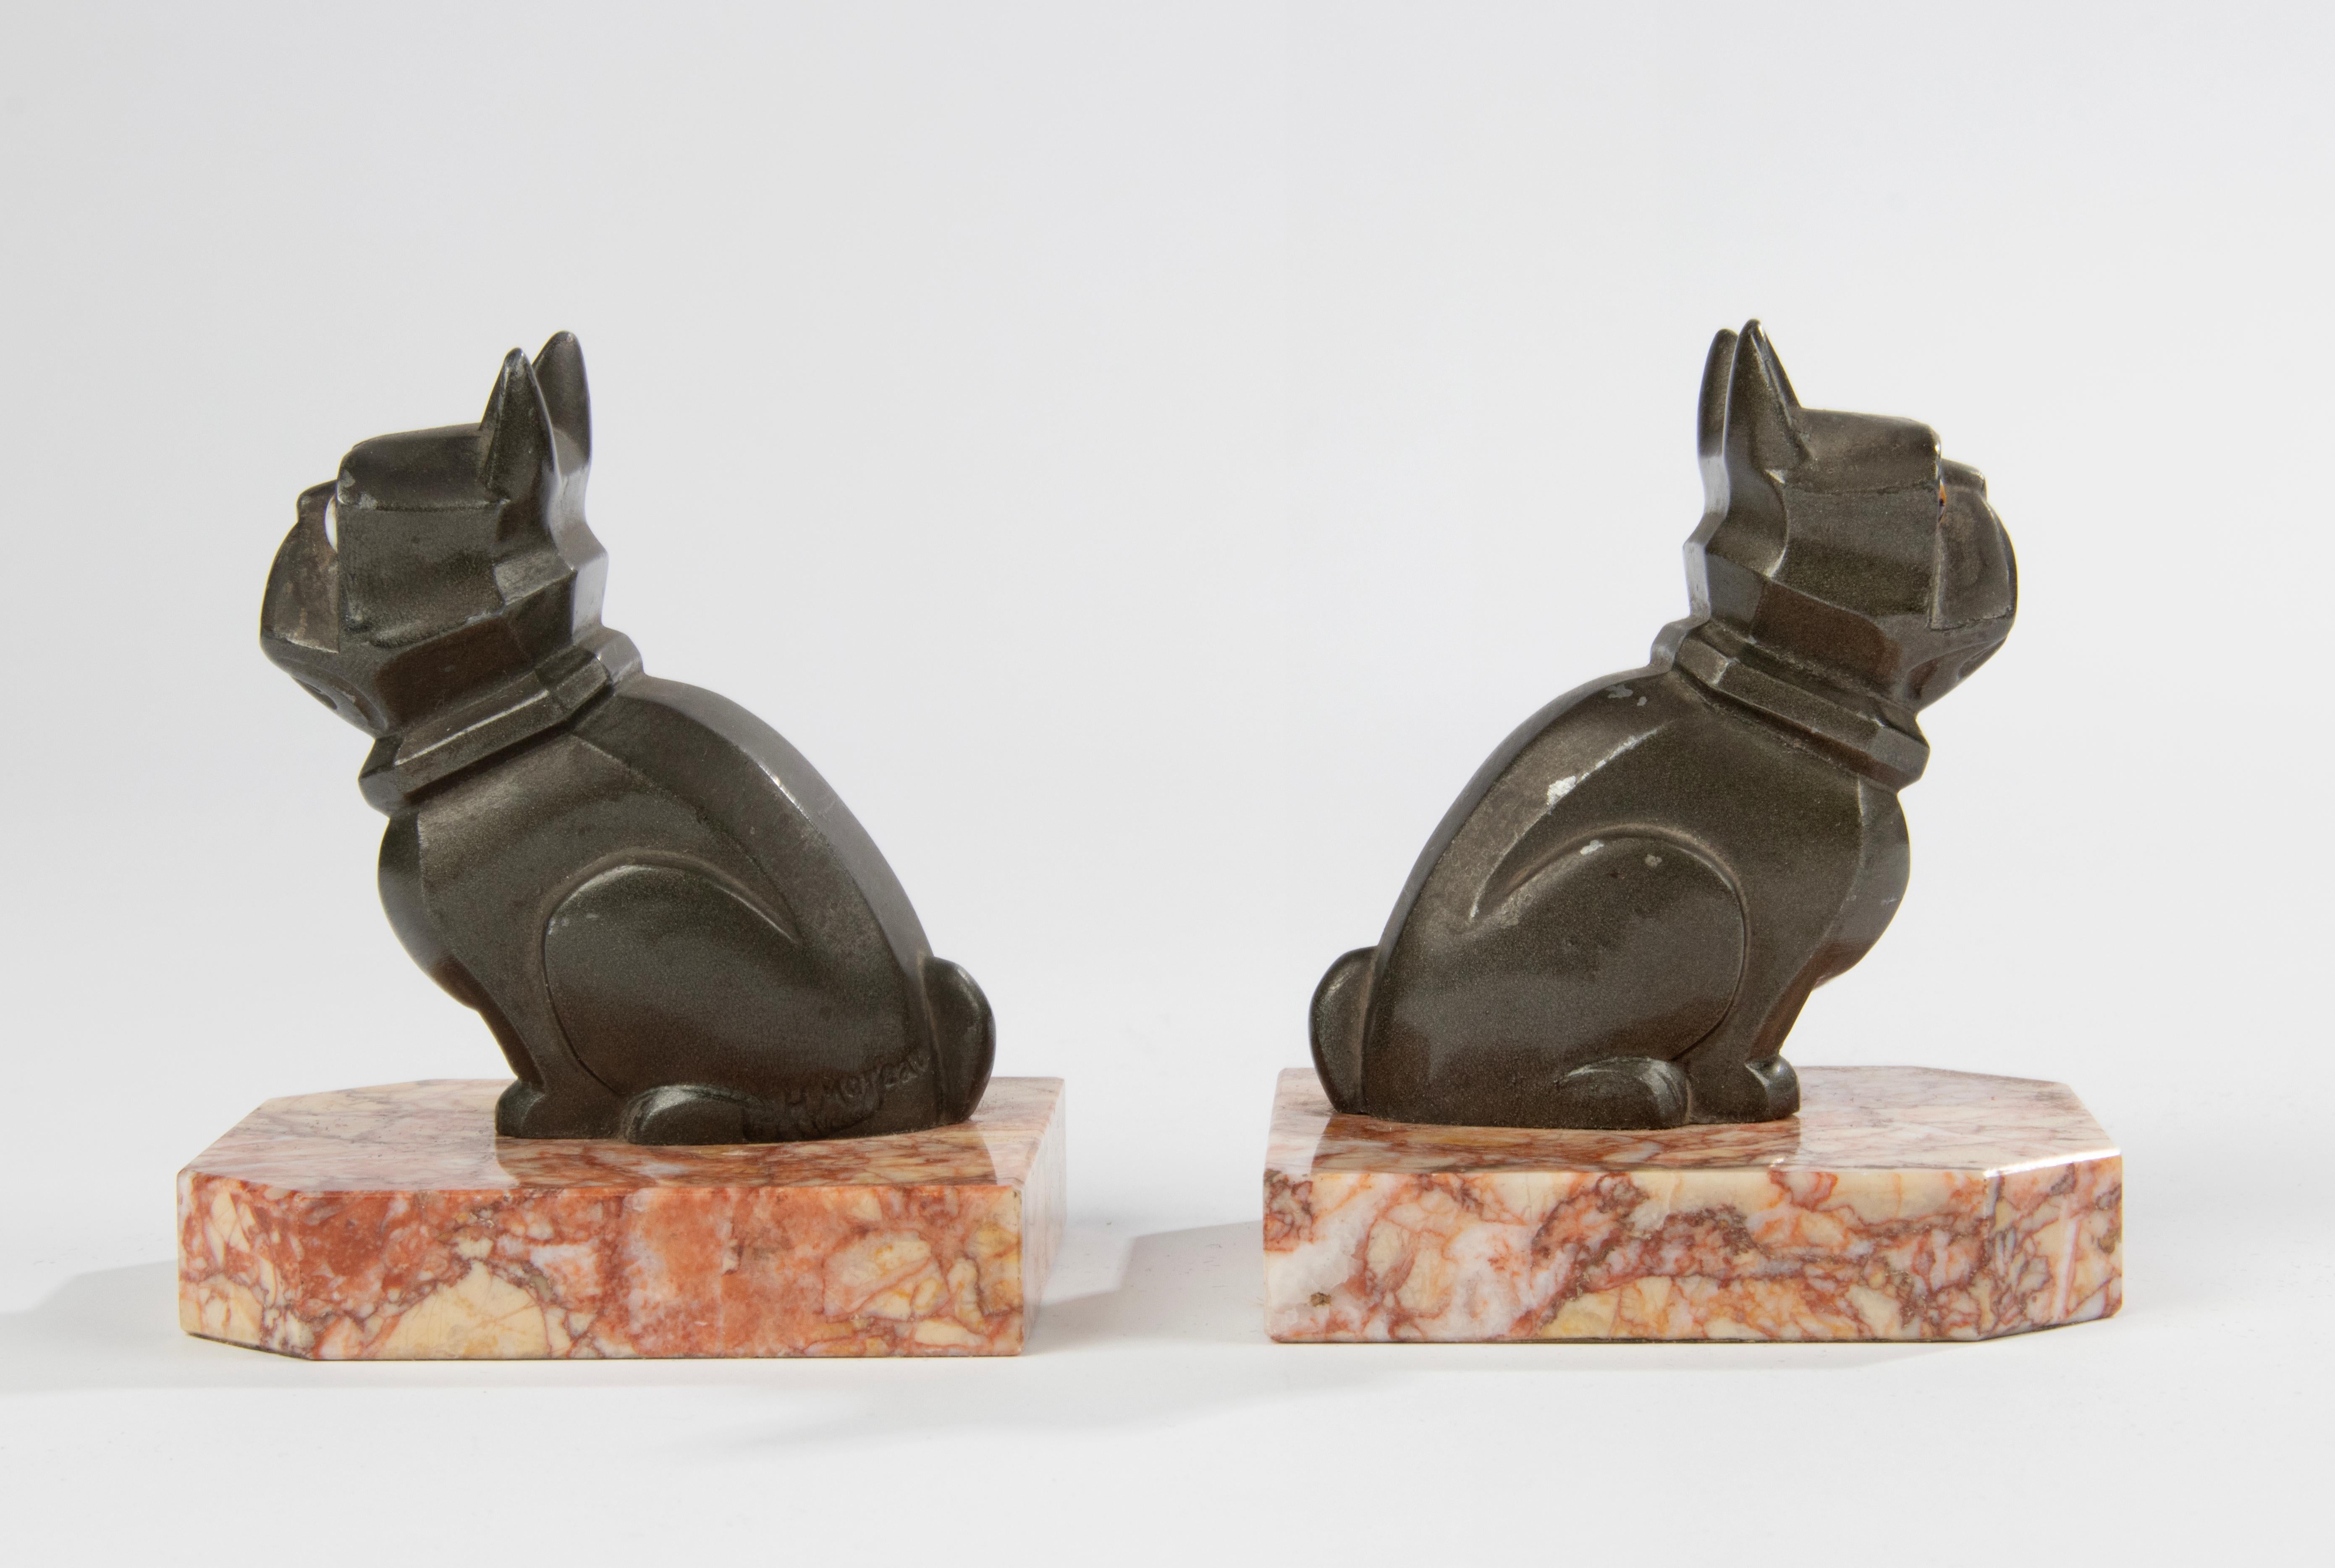 A pair of Art Deco period patinated spelter (metal alloy) bookends with cubistic sculpted French bulldogs with glass eyes, on a marble plinth. Signed H. Moreau. The bulging glass eyes have an amusing expression. The sculptures are still in beautiful